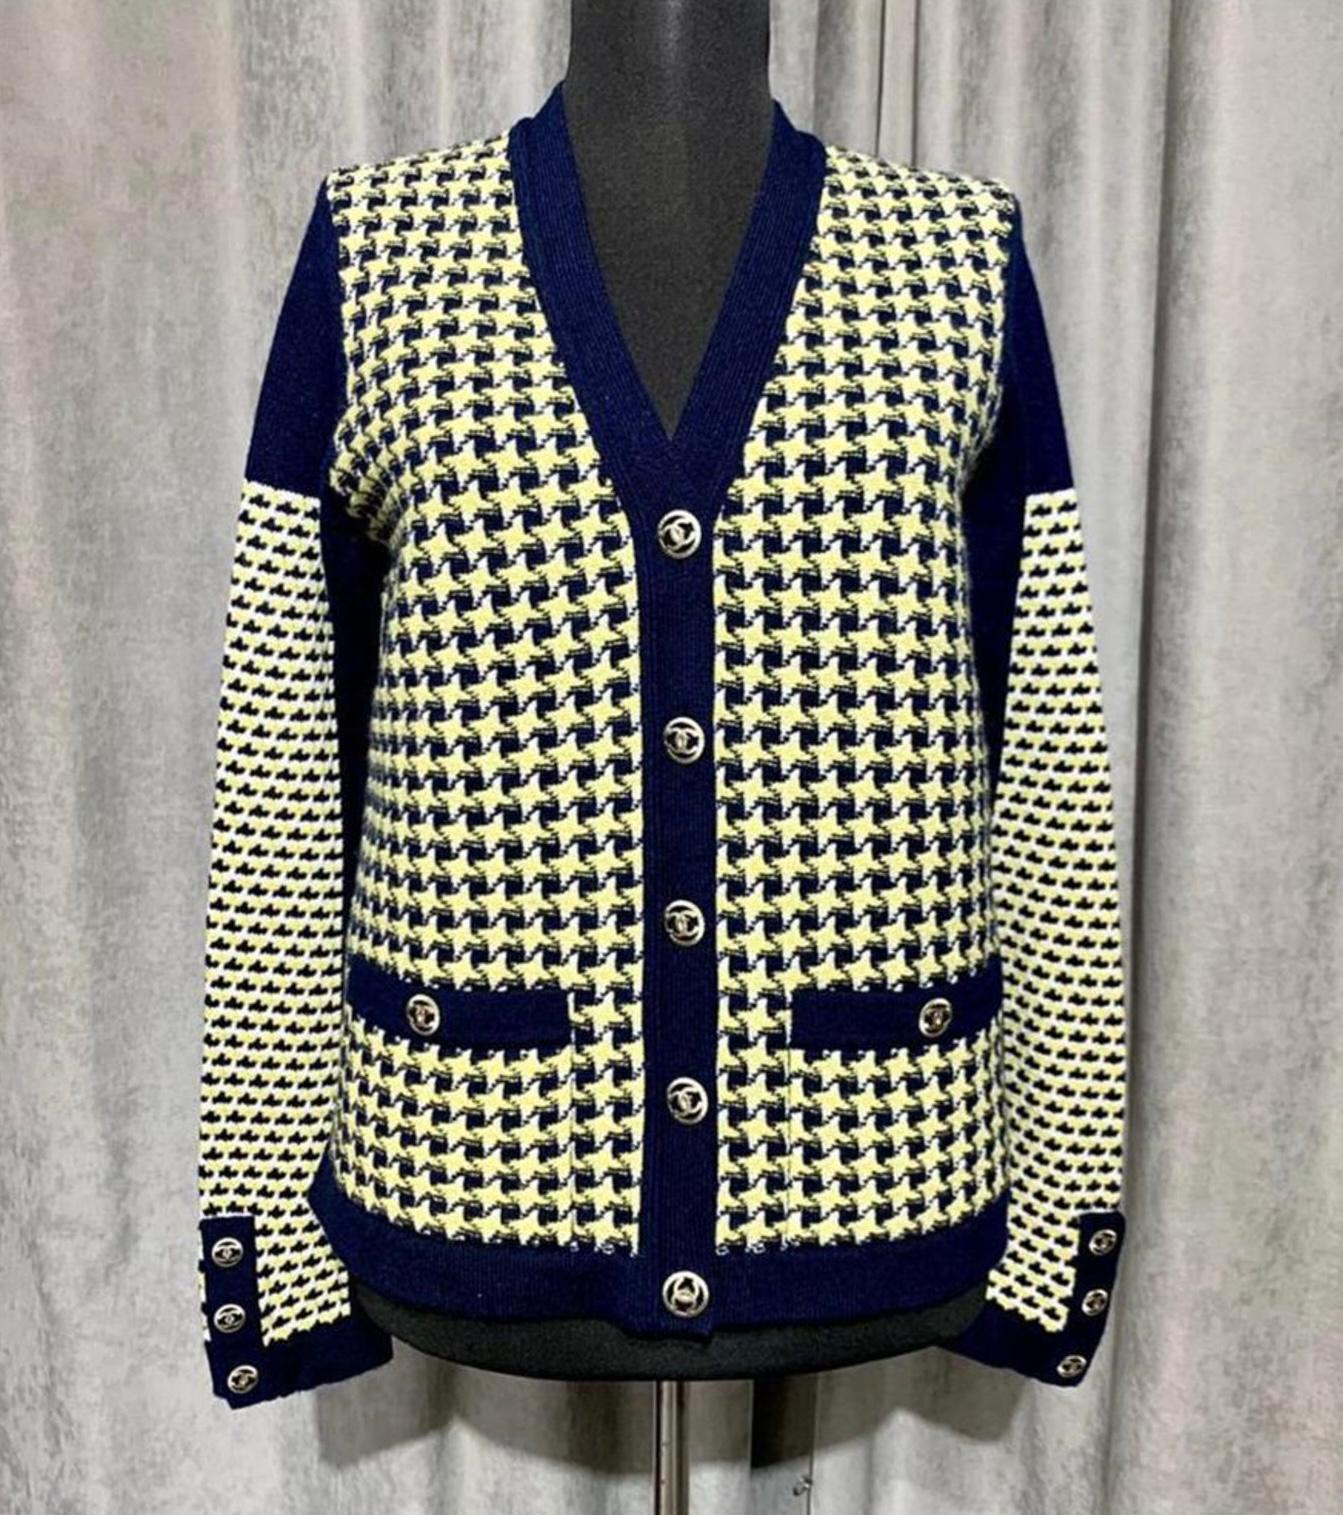 Stunning Chanel navy and yellow cashmere jacket with CC logo buttons.
Timeless houndstooth pattern, composition 100% cashmere.
Size mark 44 FR. Only tried once, no signs of wear.
